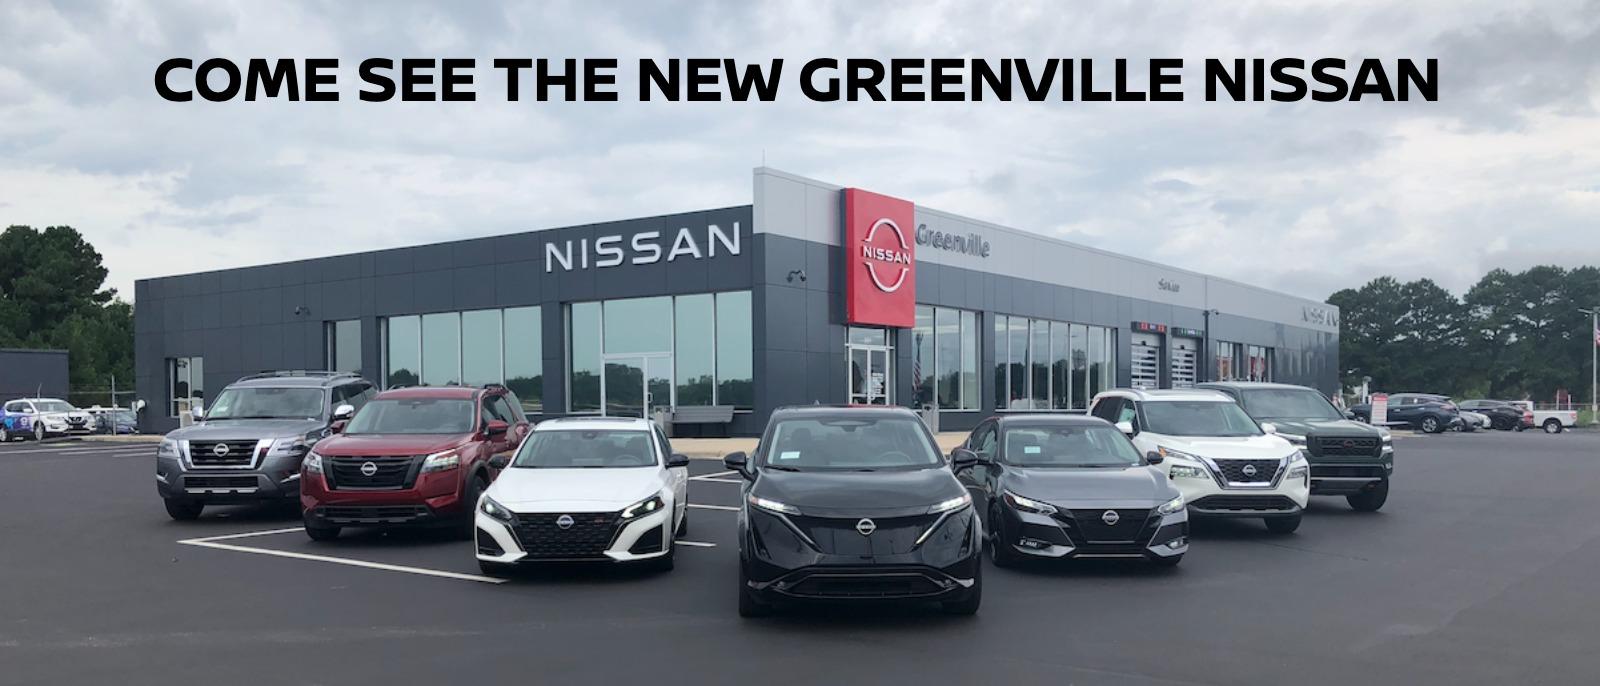 The New Greenville Nissan